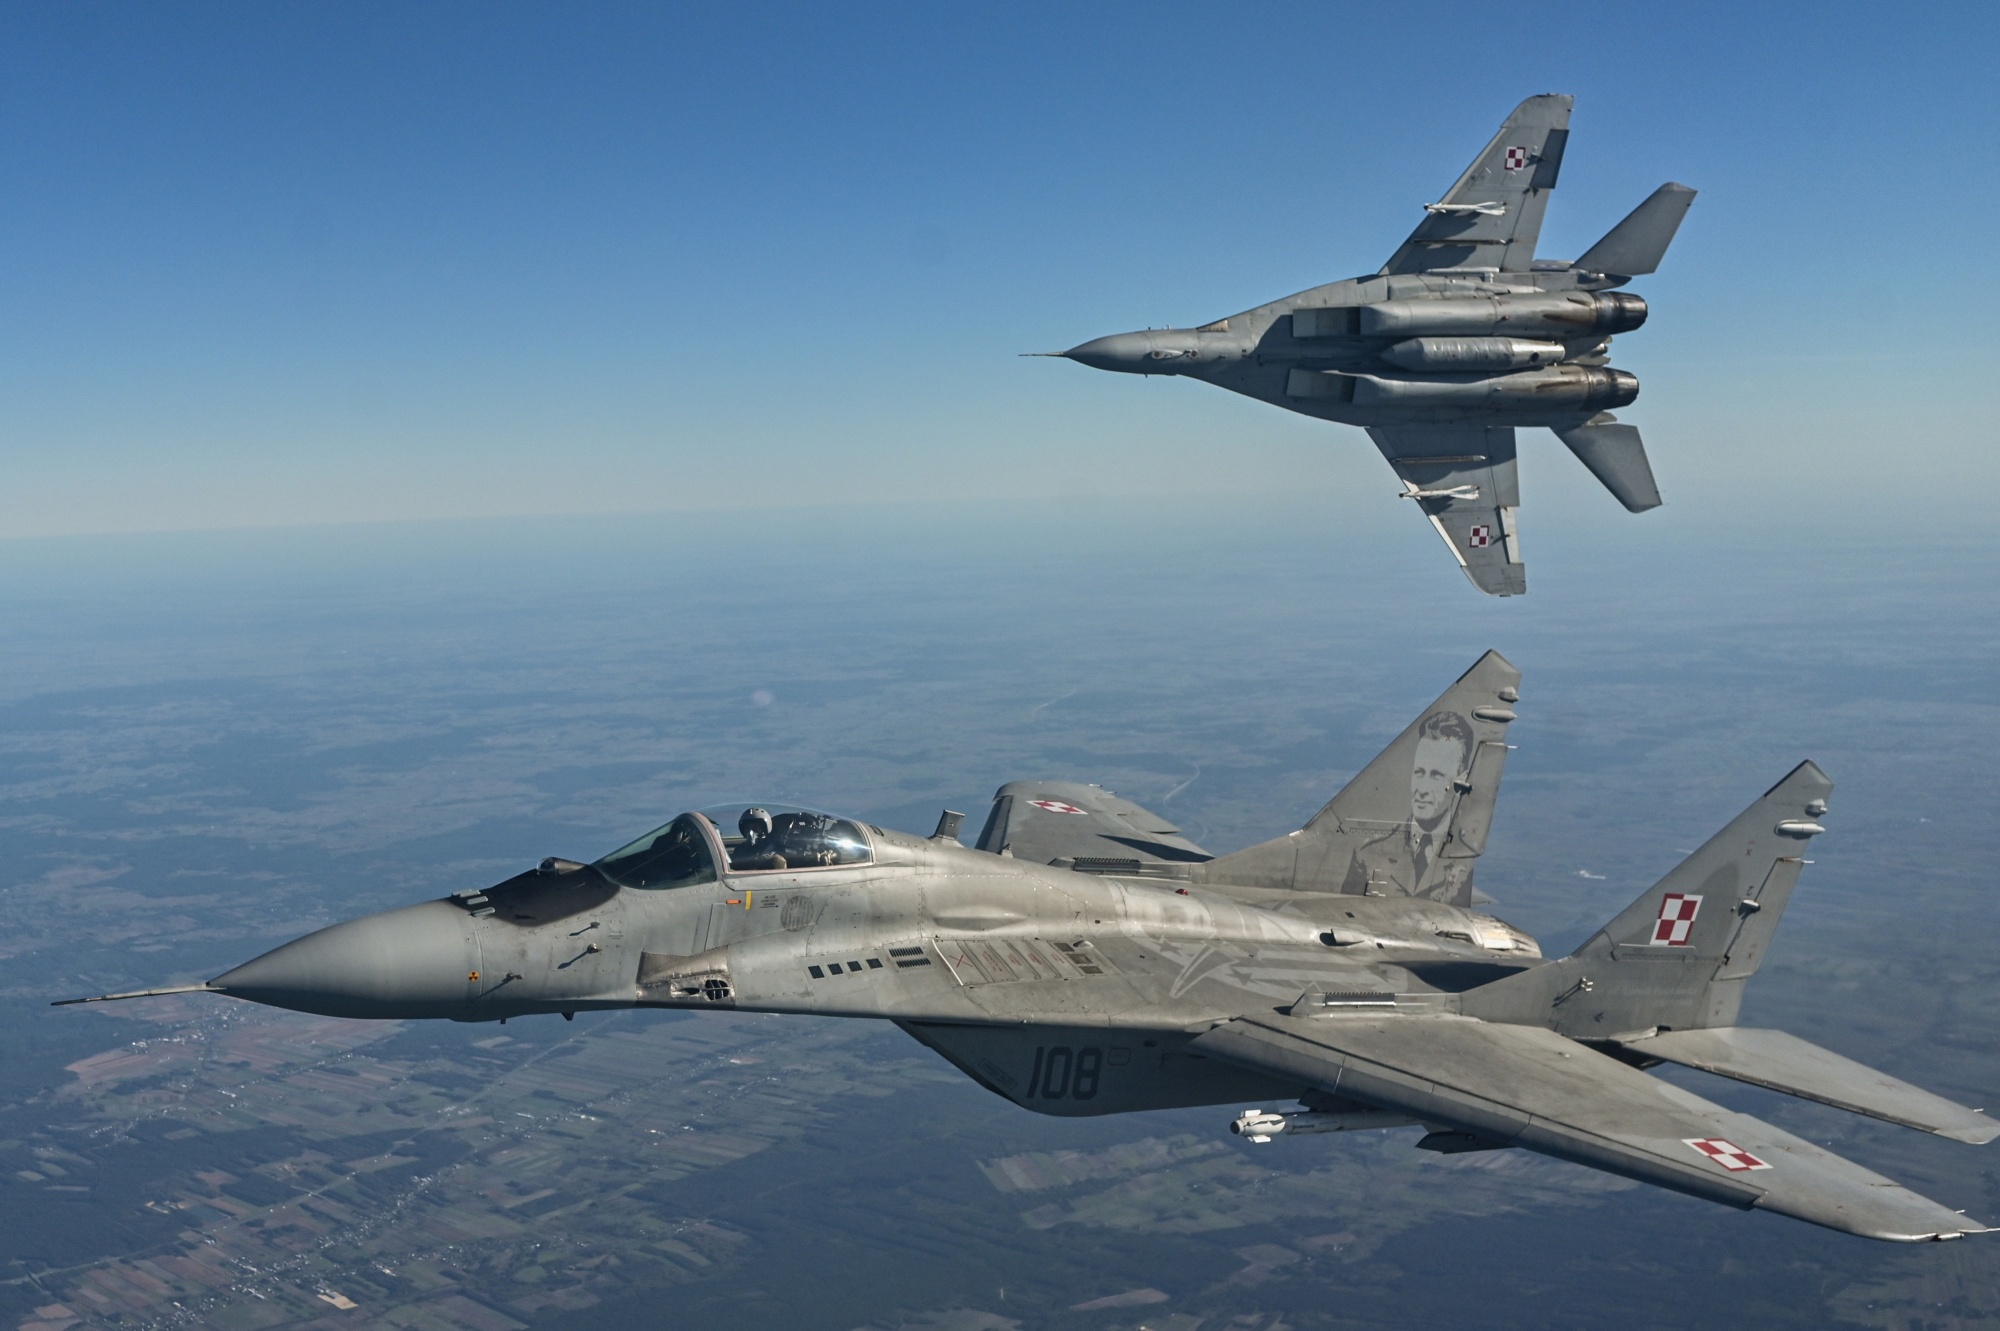 Polish Air Force MIG-29 fighter jets.